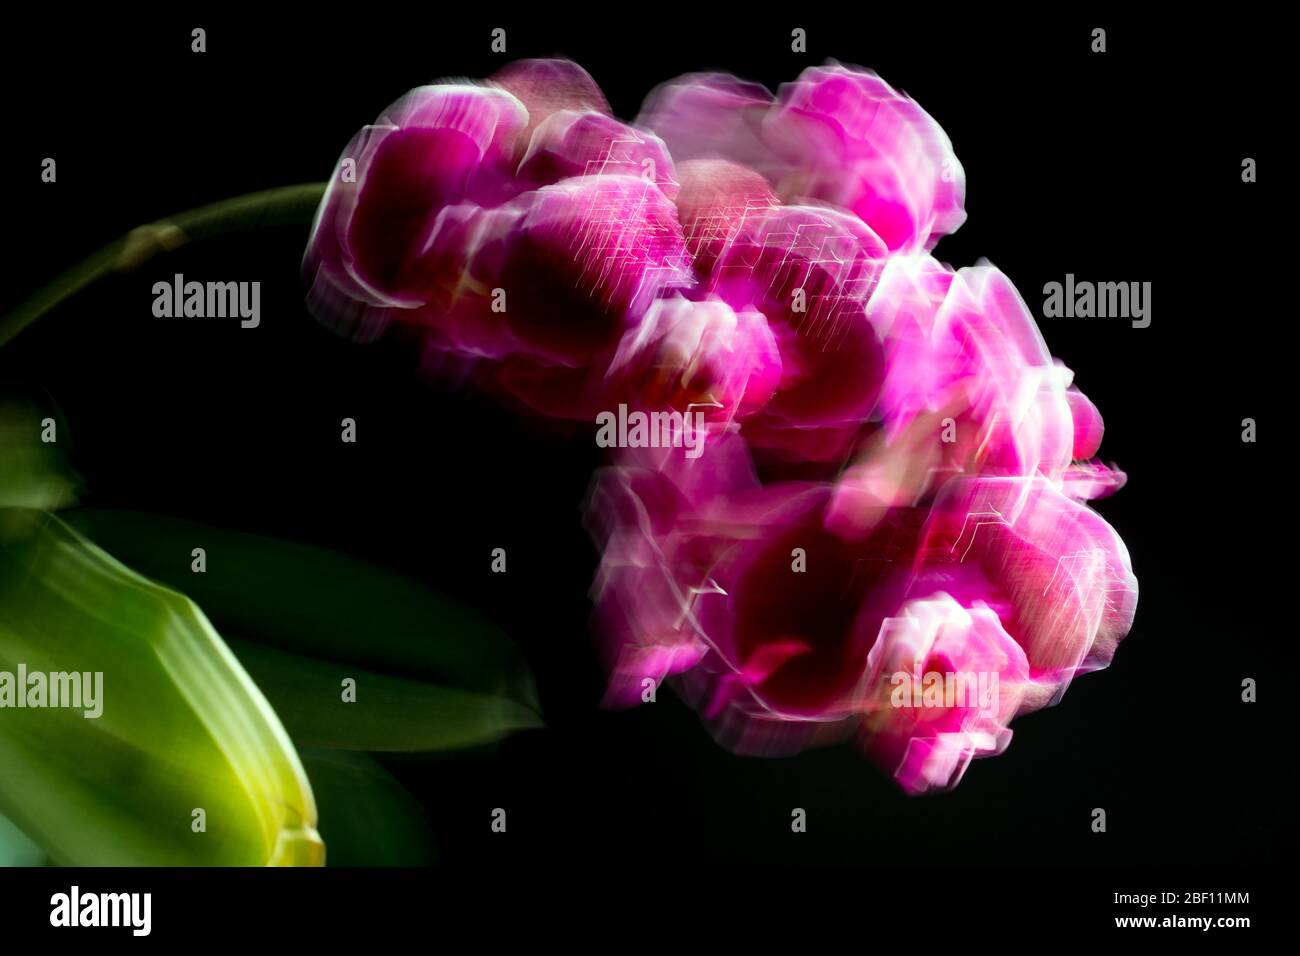 Blurred orchid plant with purple flowers on black background Stock Photo